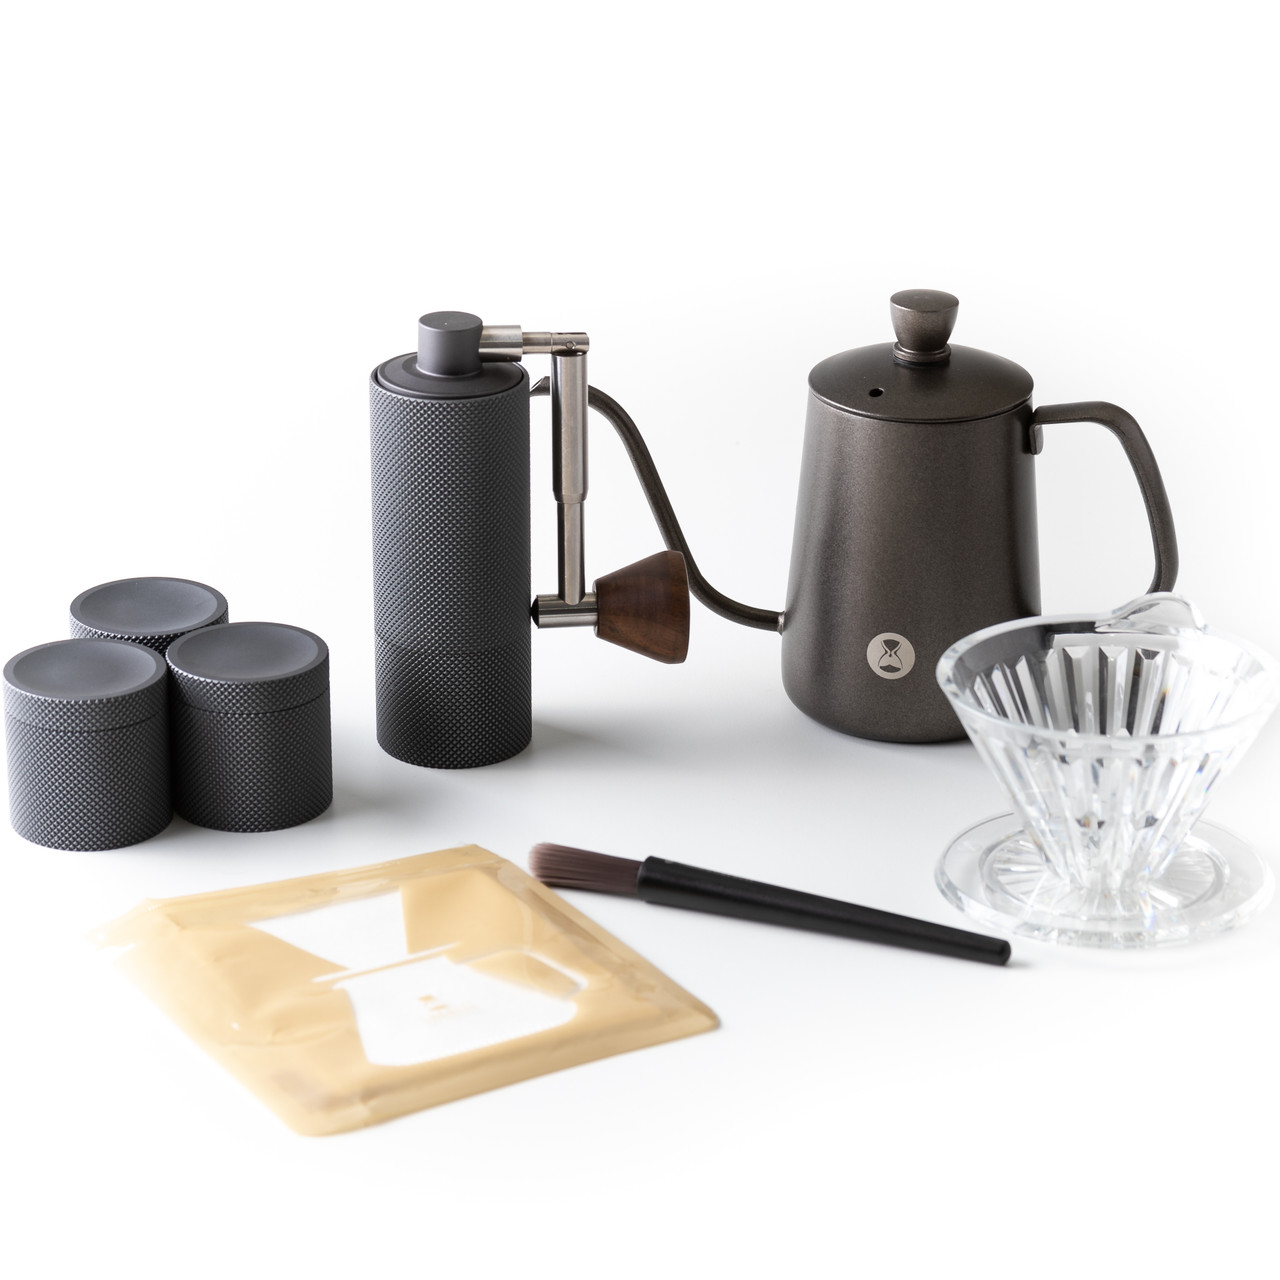 Image of Timemore NANO Carrying Case Pour Over Kit